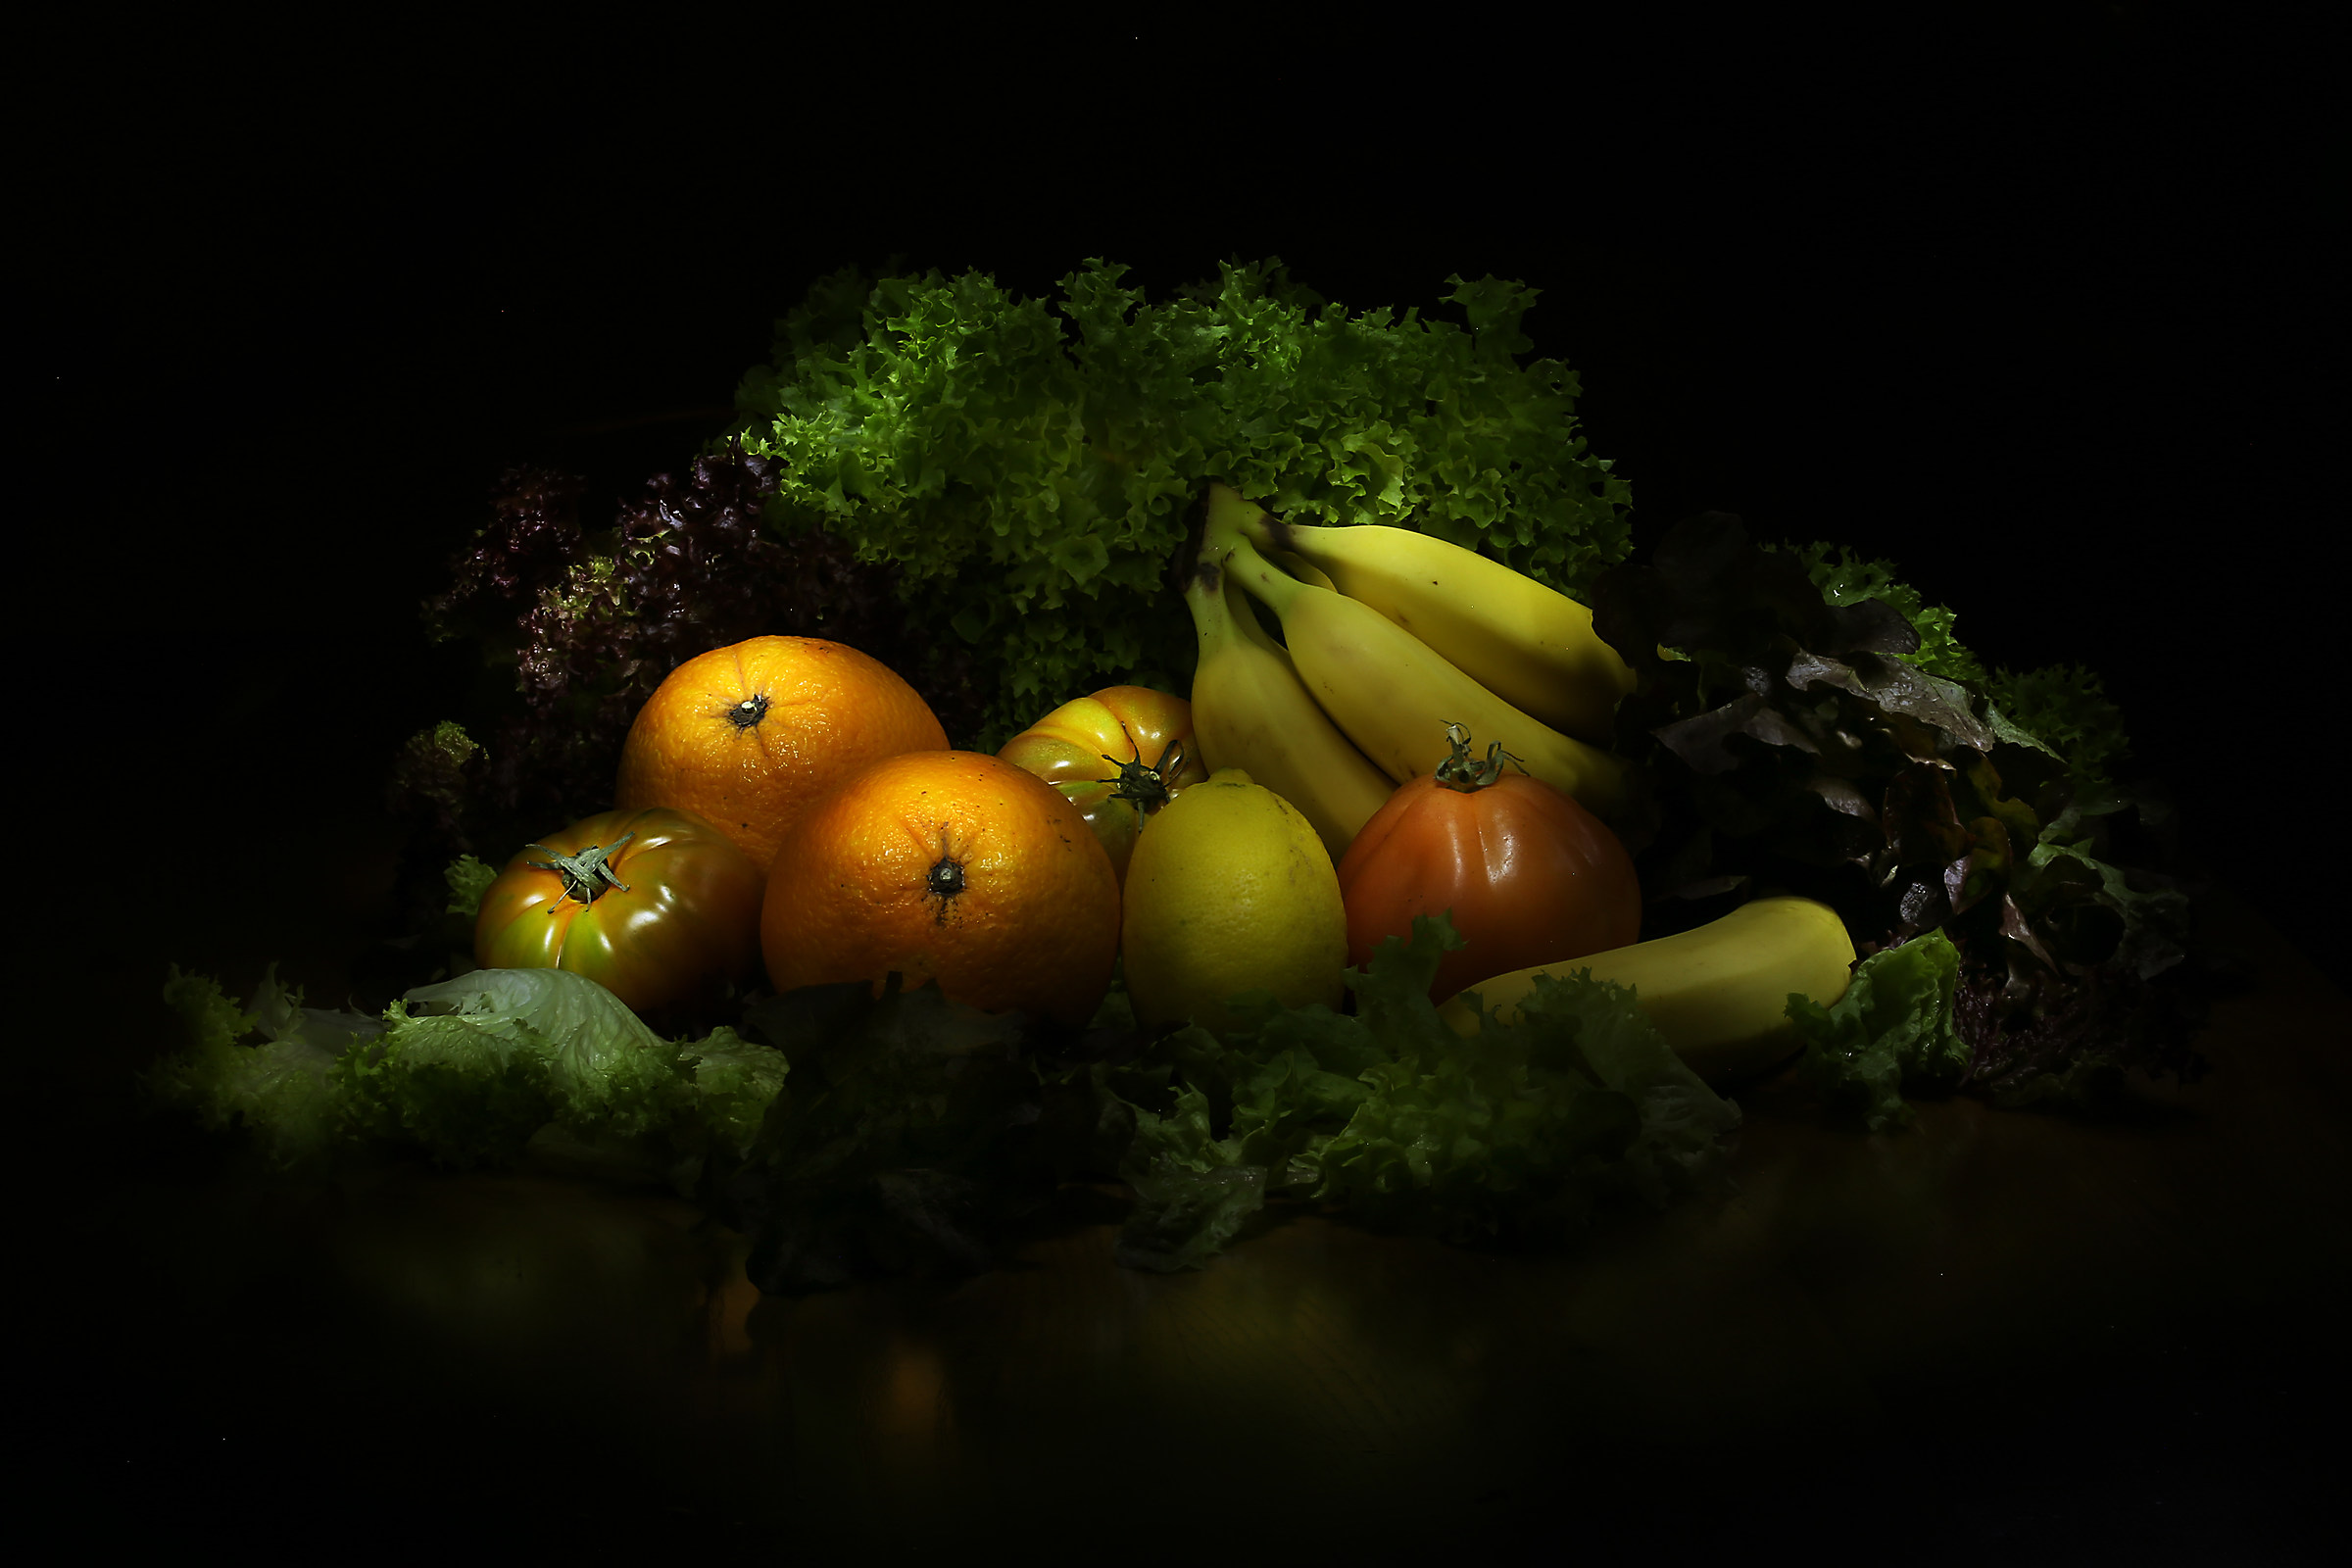 Fruits and vegetables - light painting...